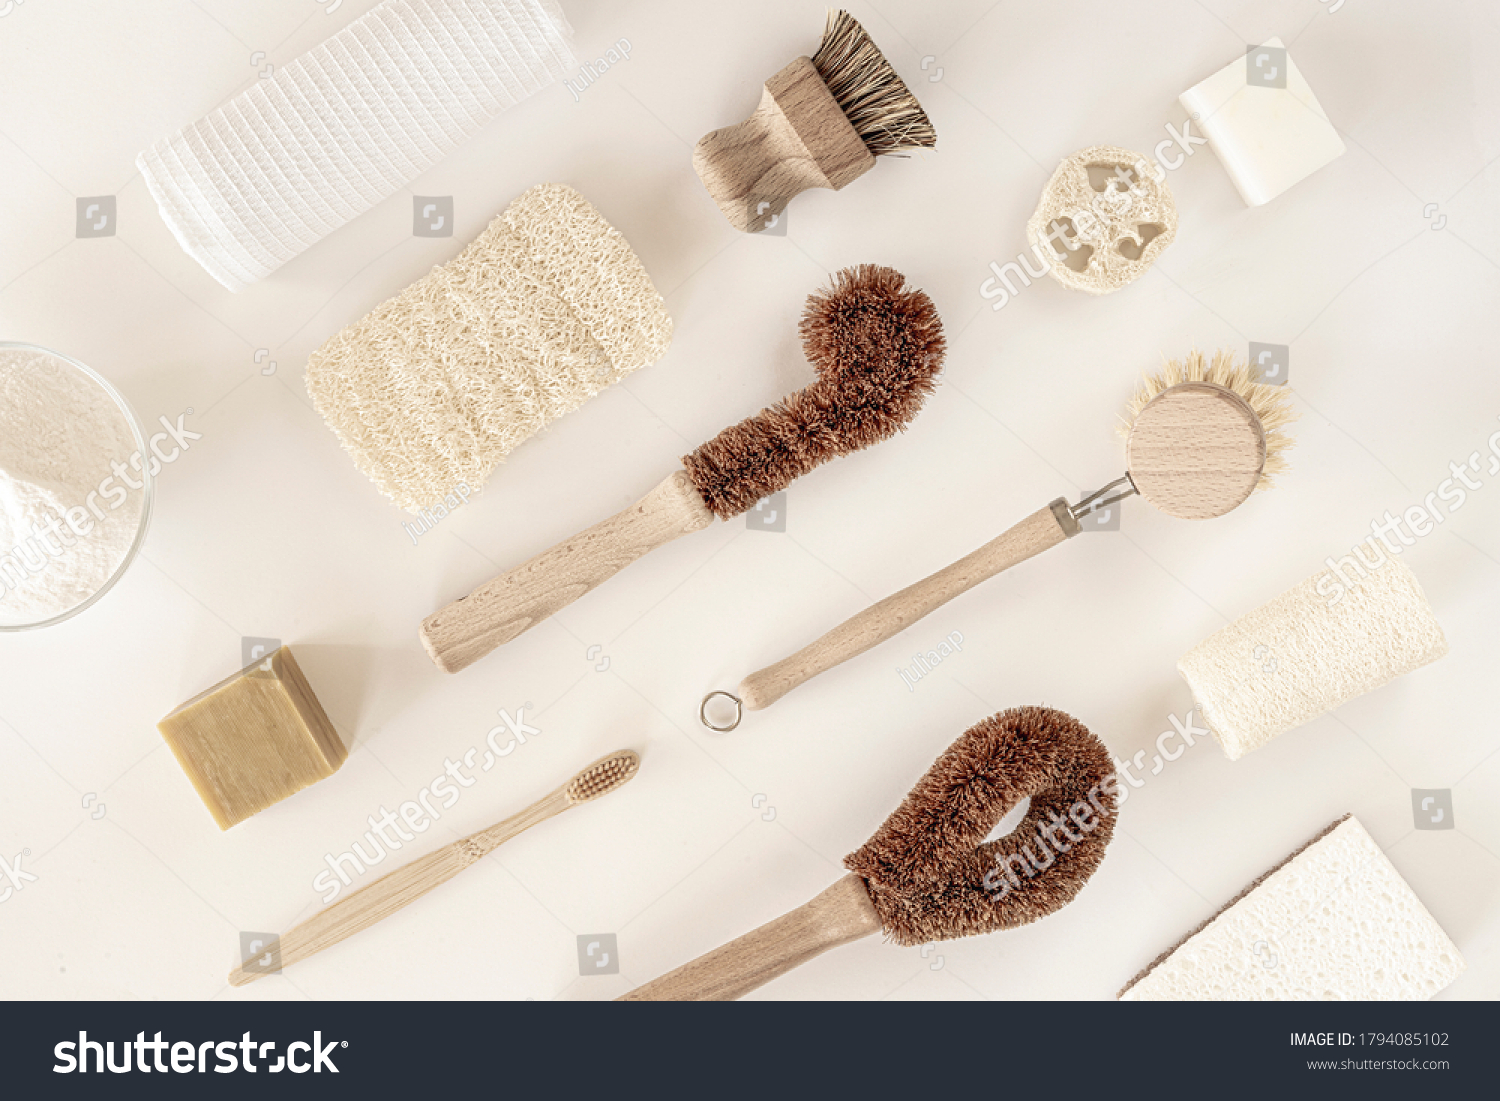 Zero waste kitchen cleaning concept. Eco friendly natural cleaning tools and products, bamboo dish brushes and lemon with baking soda. No plastic, eco-friendly lifestyle. Top view, flat lay. #1794085102